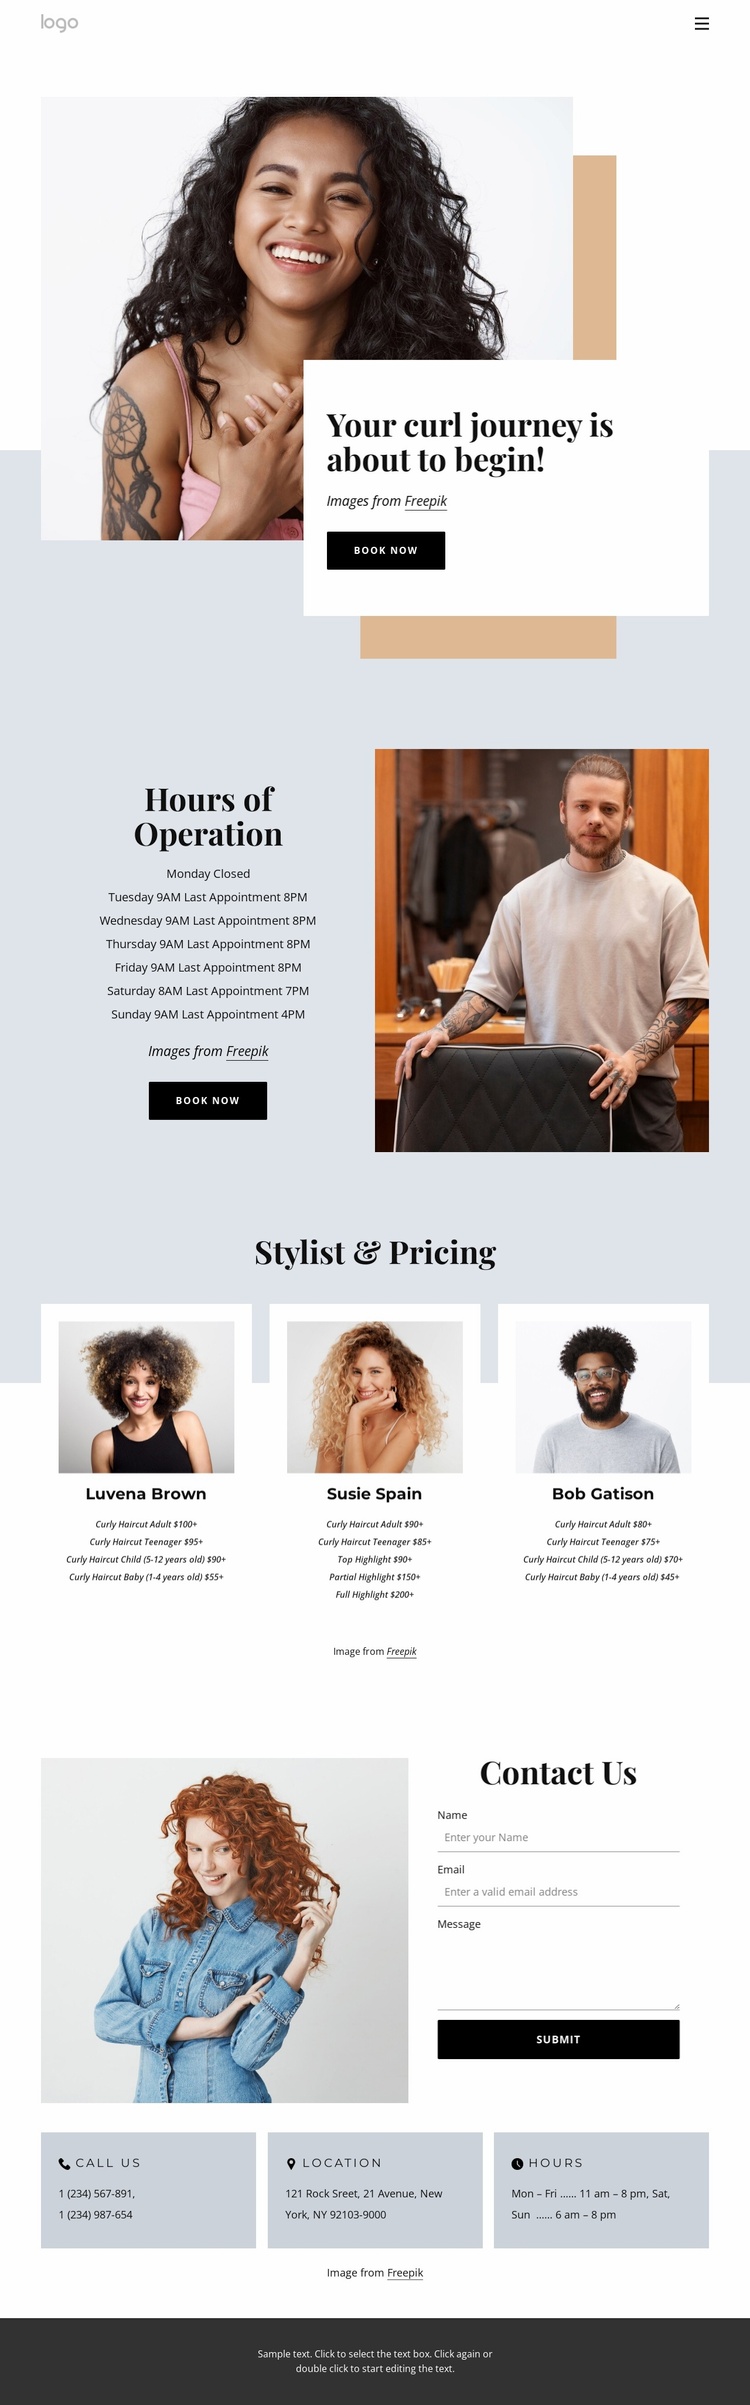 Your curl journey eCommerce Template